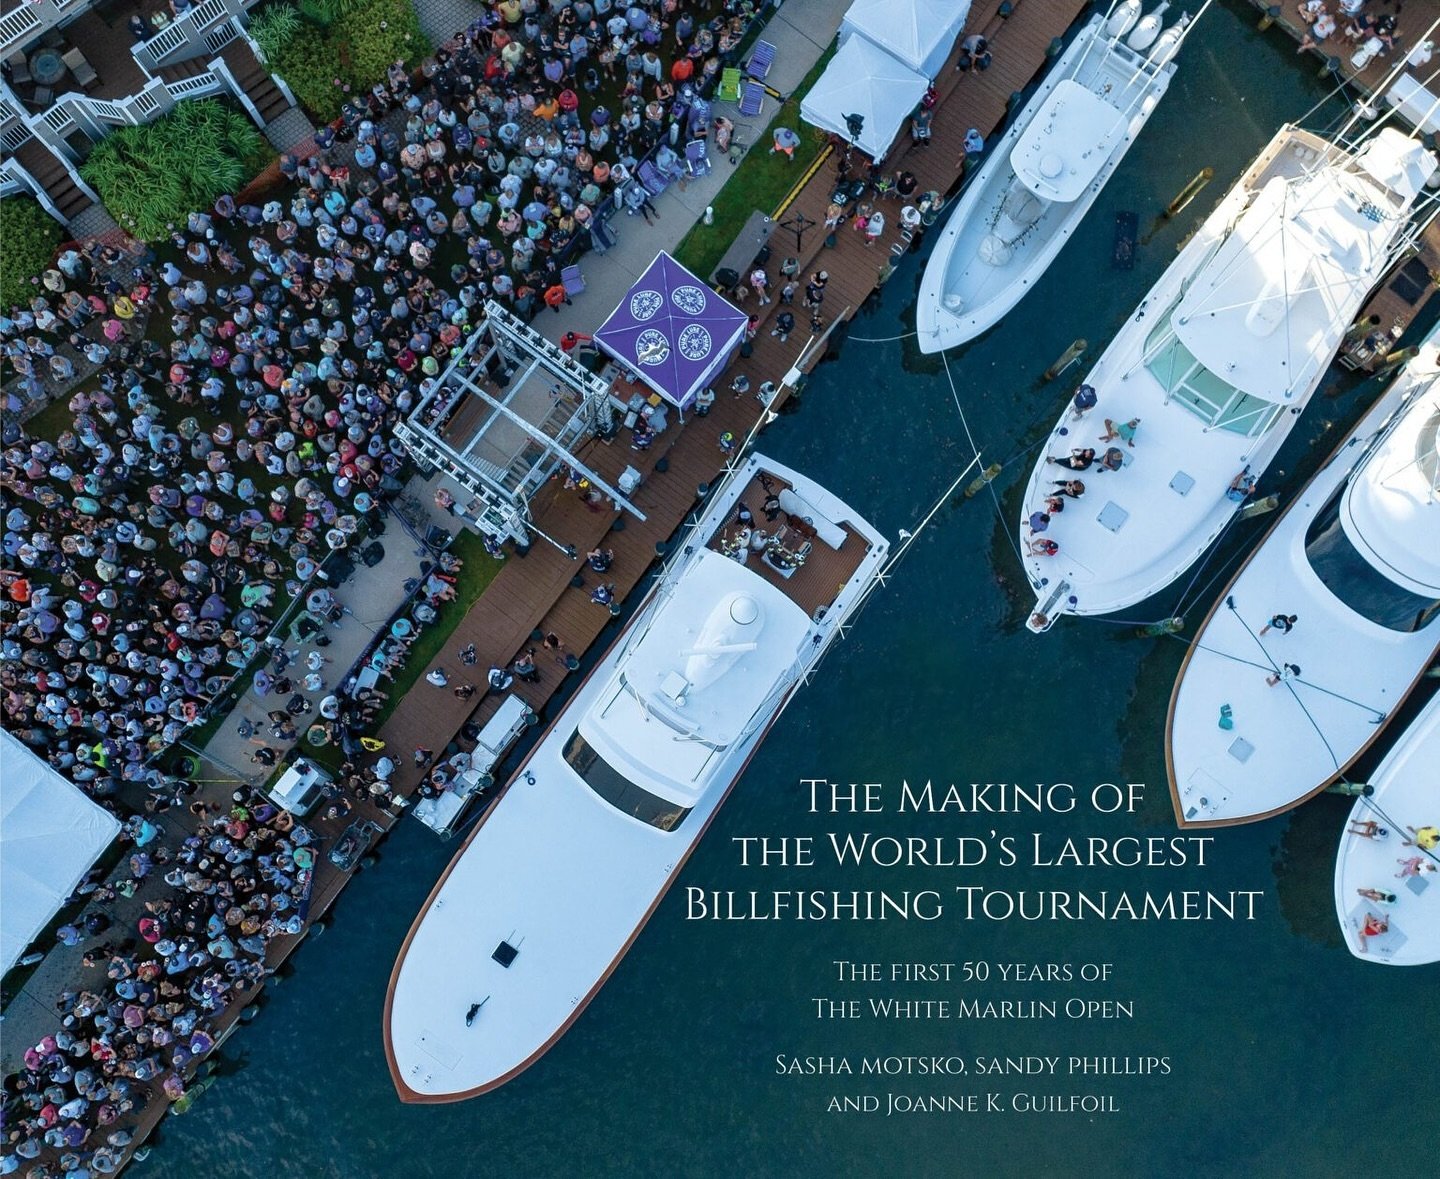 Meet Jim Motsko and Joanne Guilfoil at our upcoming book signing for &ldquo;The Making of the World&rsquo;s Largest Bill Fishing Tournament: The First 50 Years of the White Marlin Open,&rdquo;, Friday, May 17th from 11 am to 2 pm. The book will be av